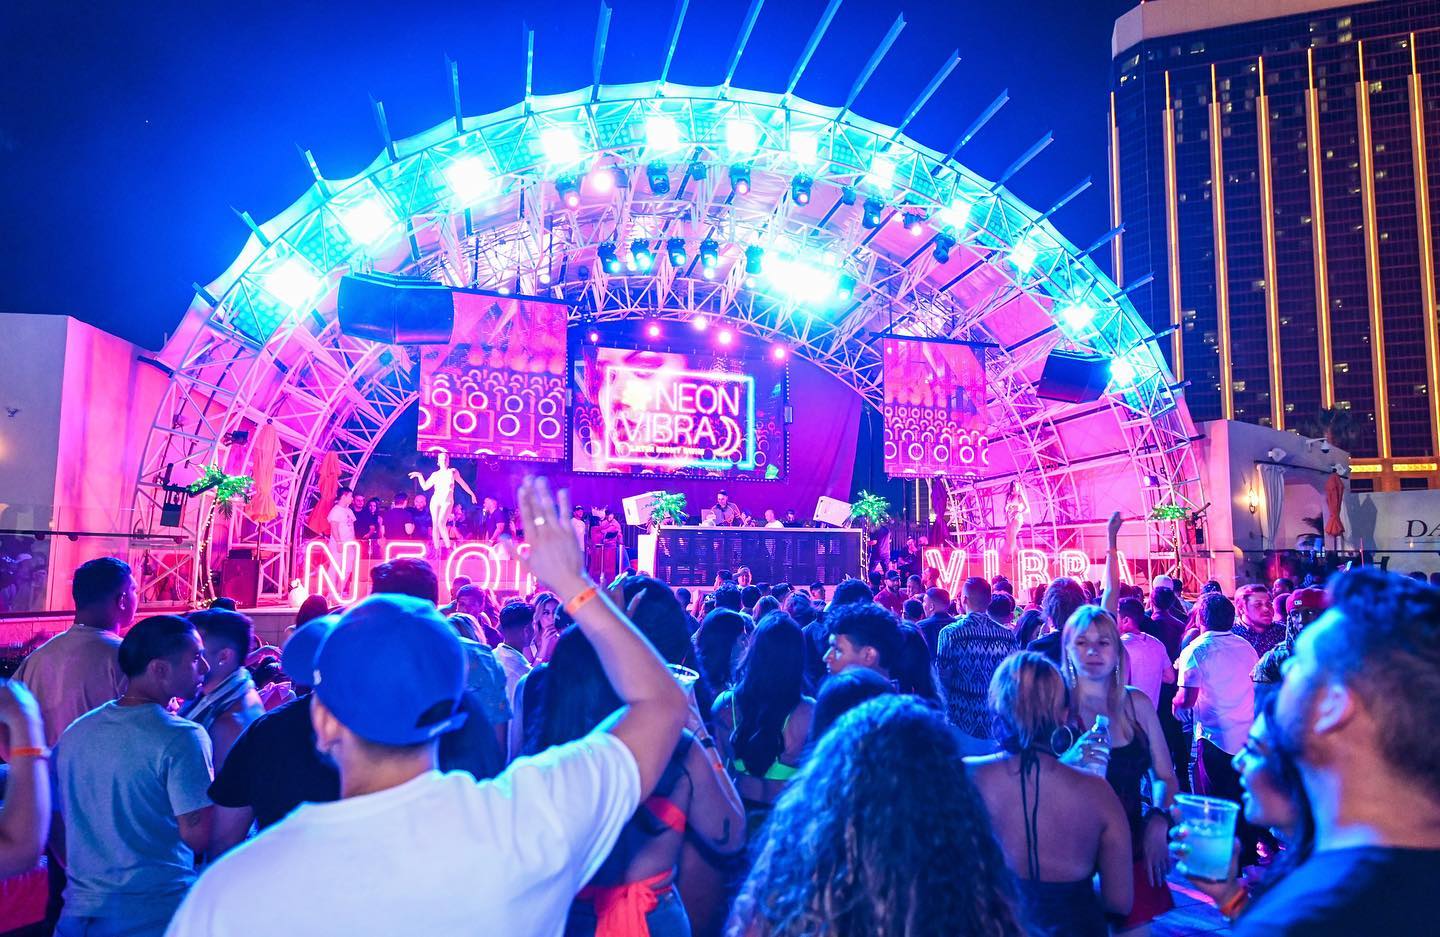 Daylight Beach Club At Night Dress Code - What is & Isn't Allowed